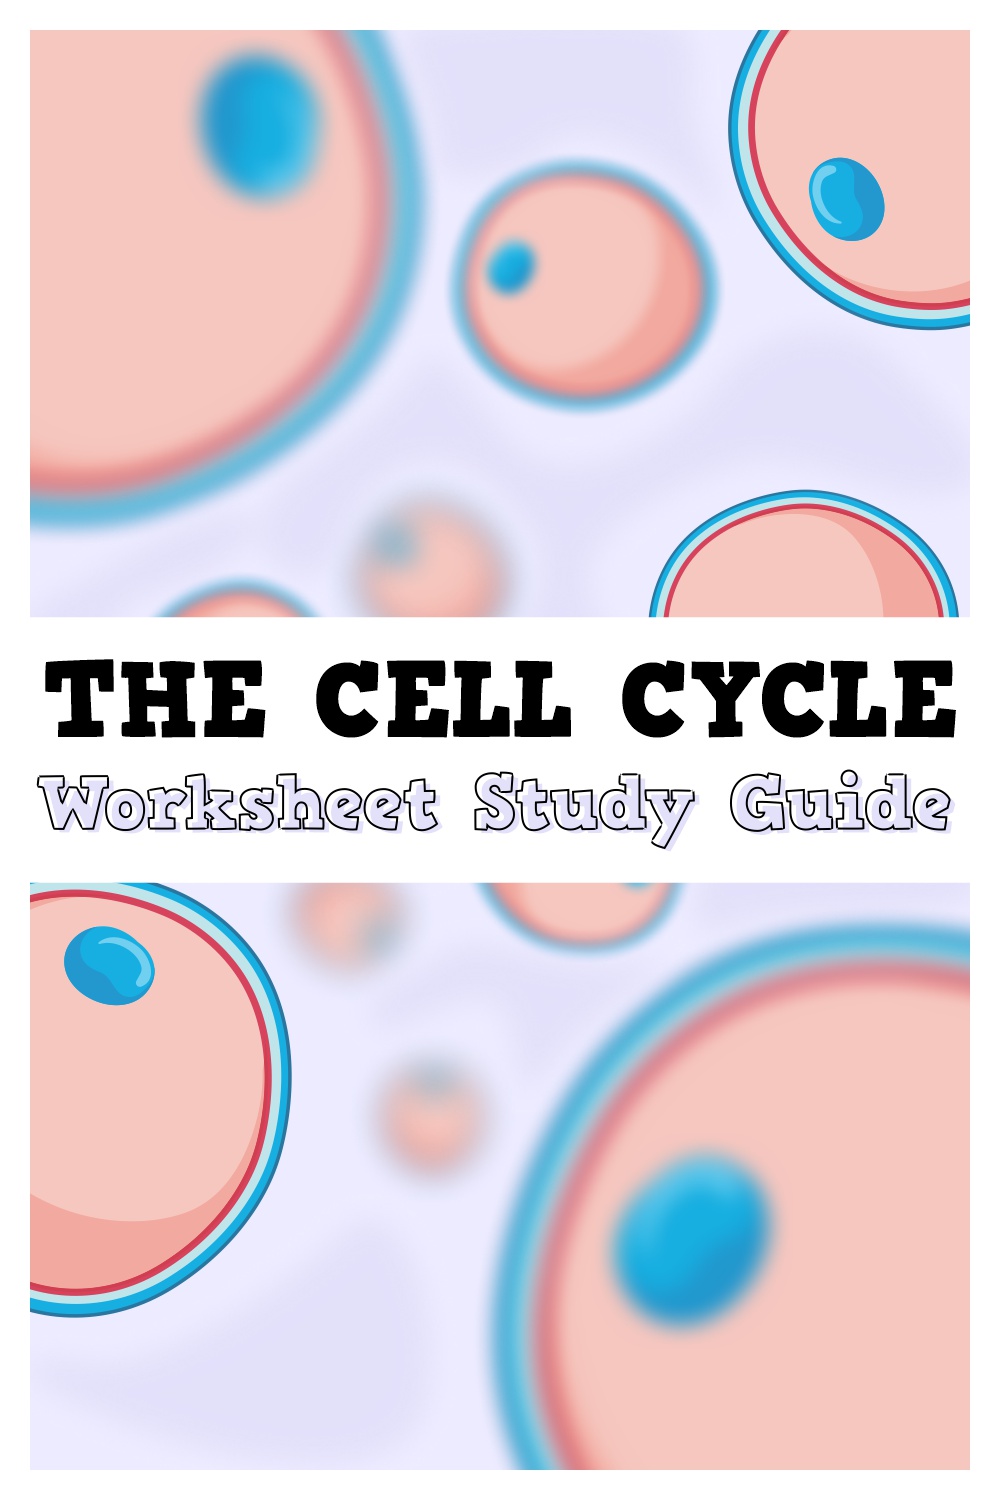 15 Images of The Cell Cycle Worksheet Study Guide